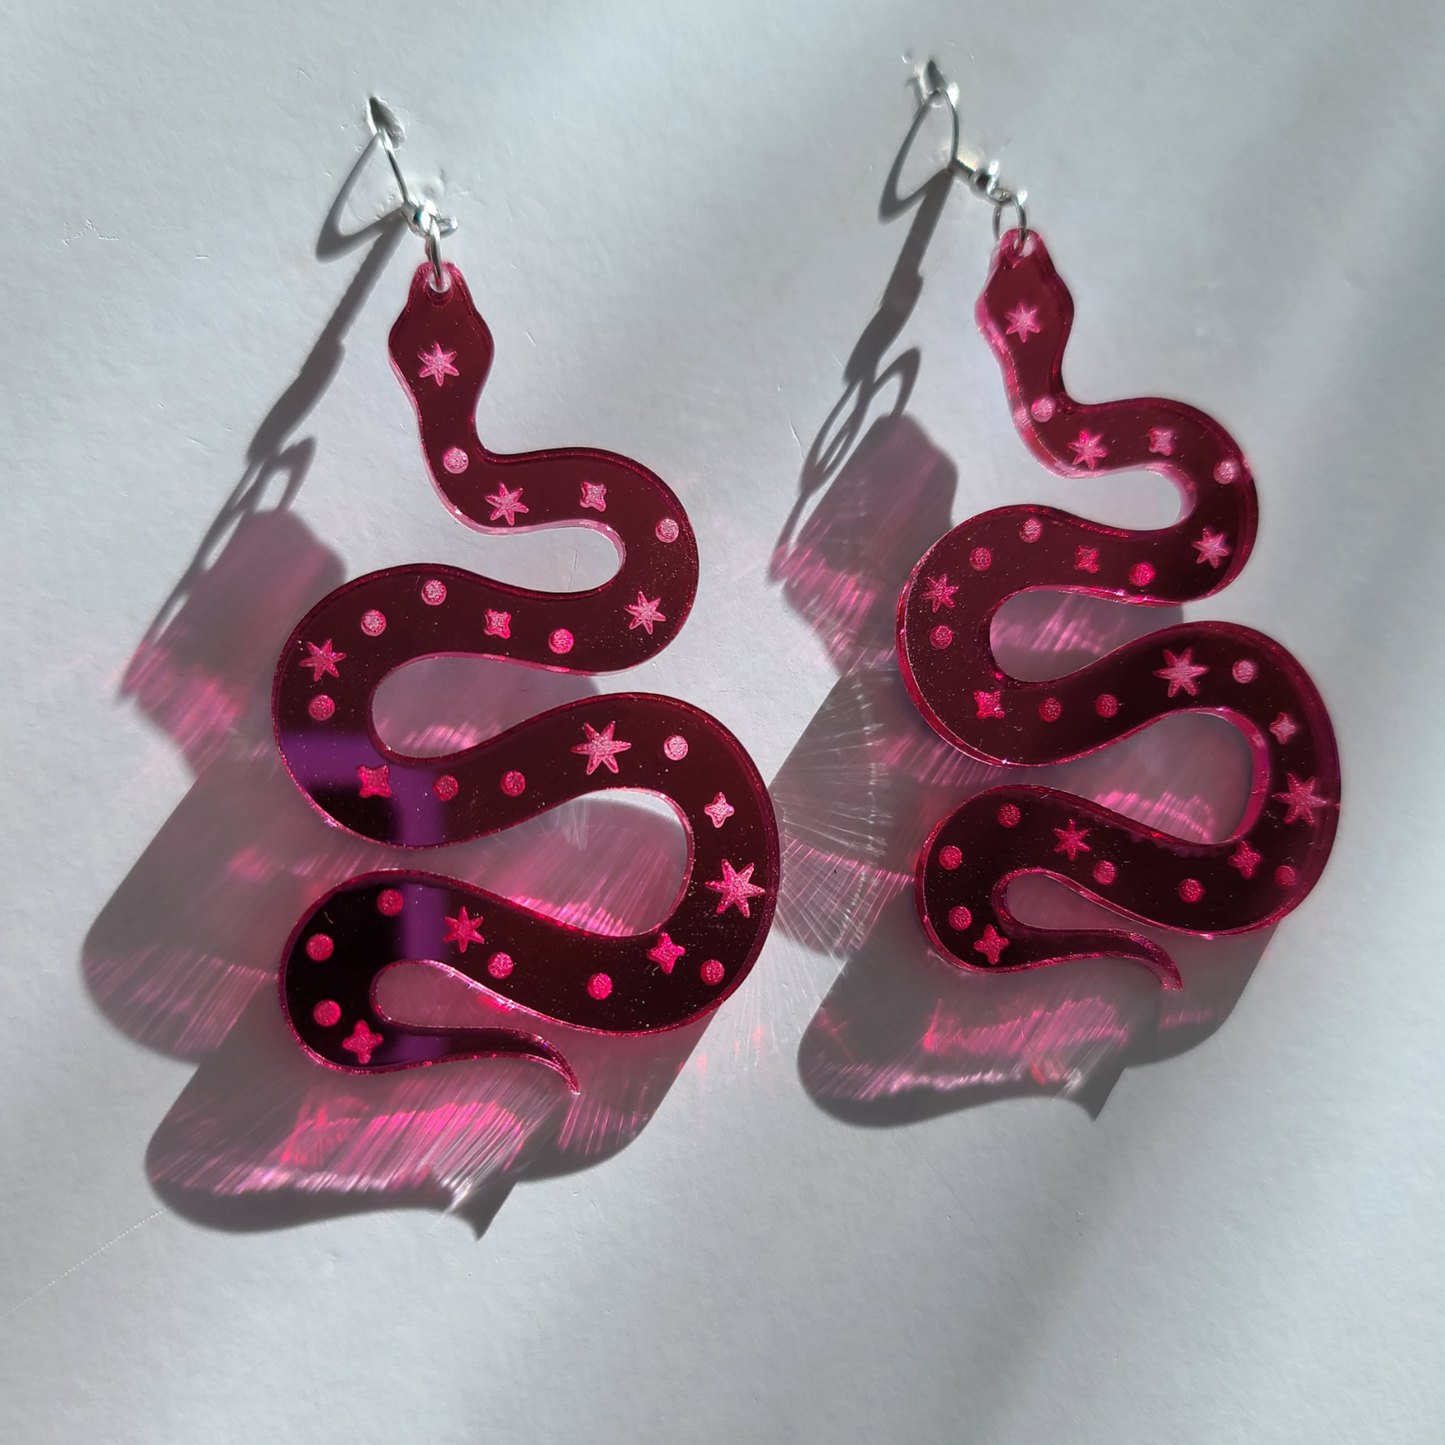 Celestial Snakes on Mirrored Pink Acrylic - Large - Earrings - Laser Cut